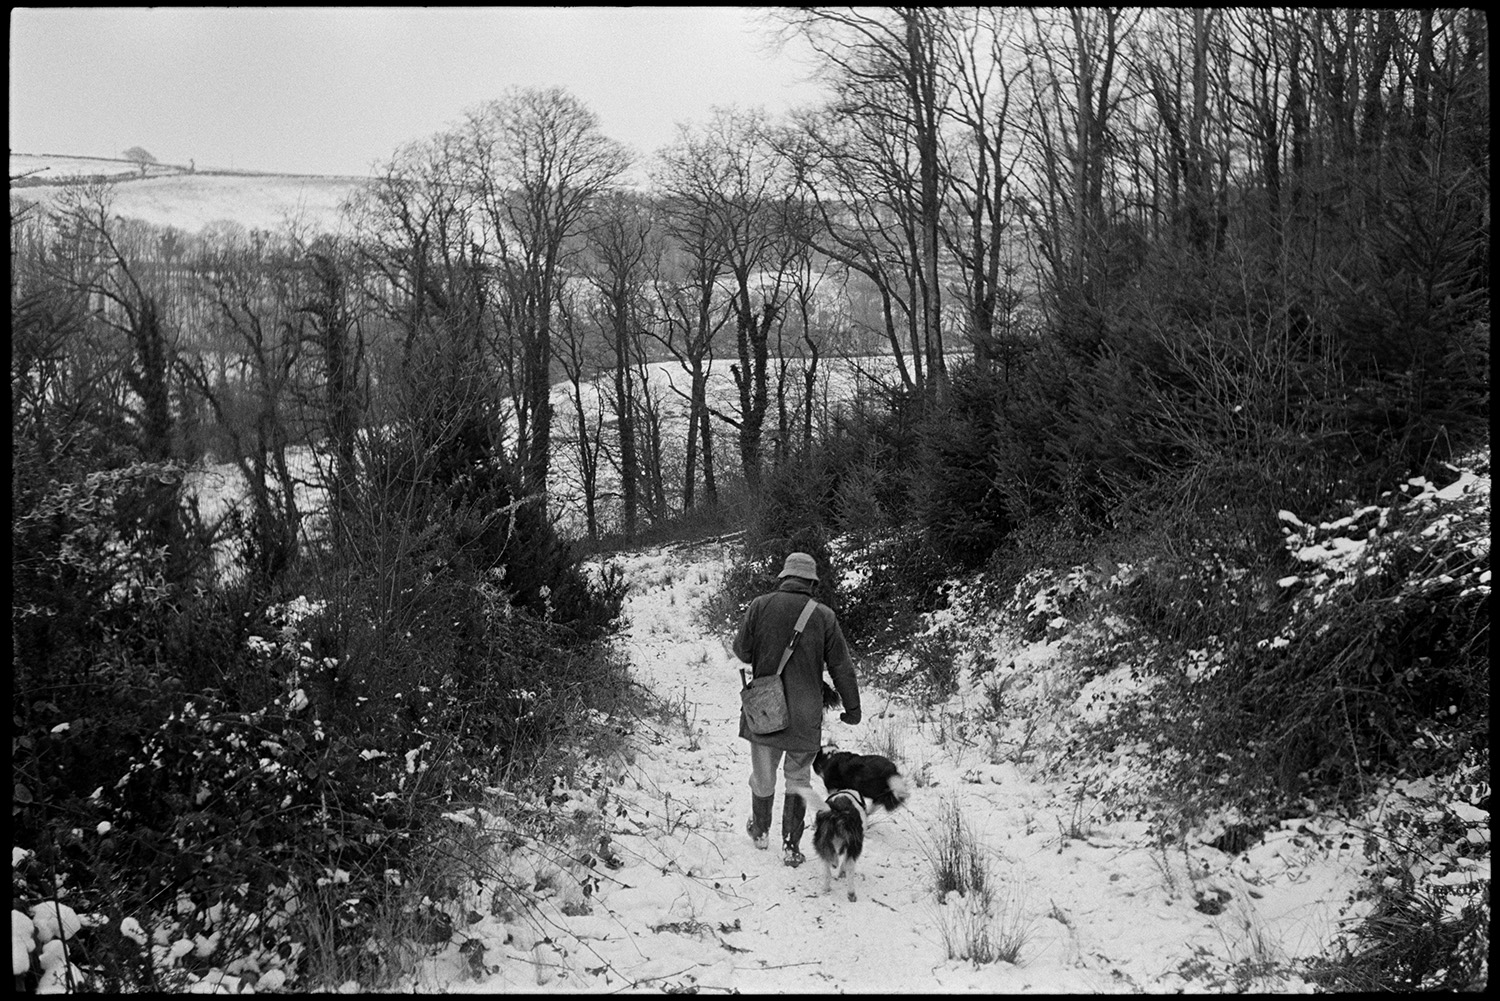 Snow, farmer and dogs breaking ice and trying to start tractor with frozen diesel fuel.
[Guy Crossman with two dogs walking along a track covered in snow at Great Warham, Beaford. In the background are trees and a view of the surrounding countryside.]